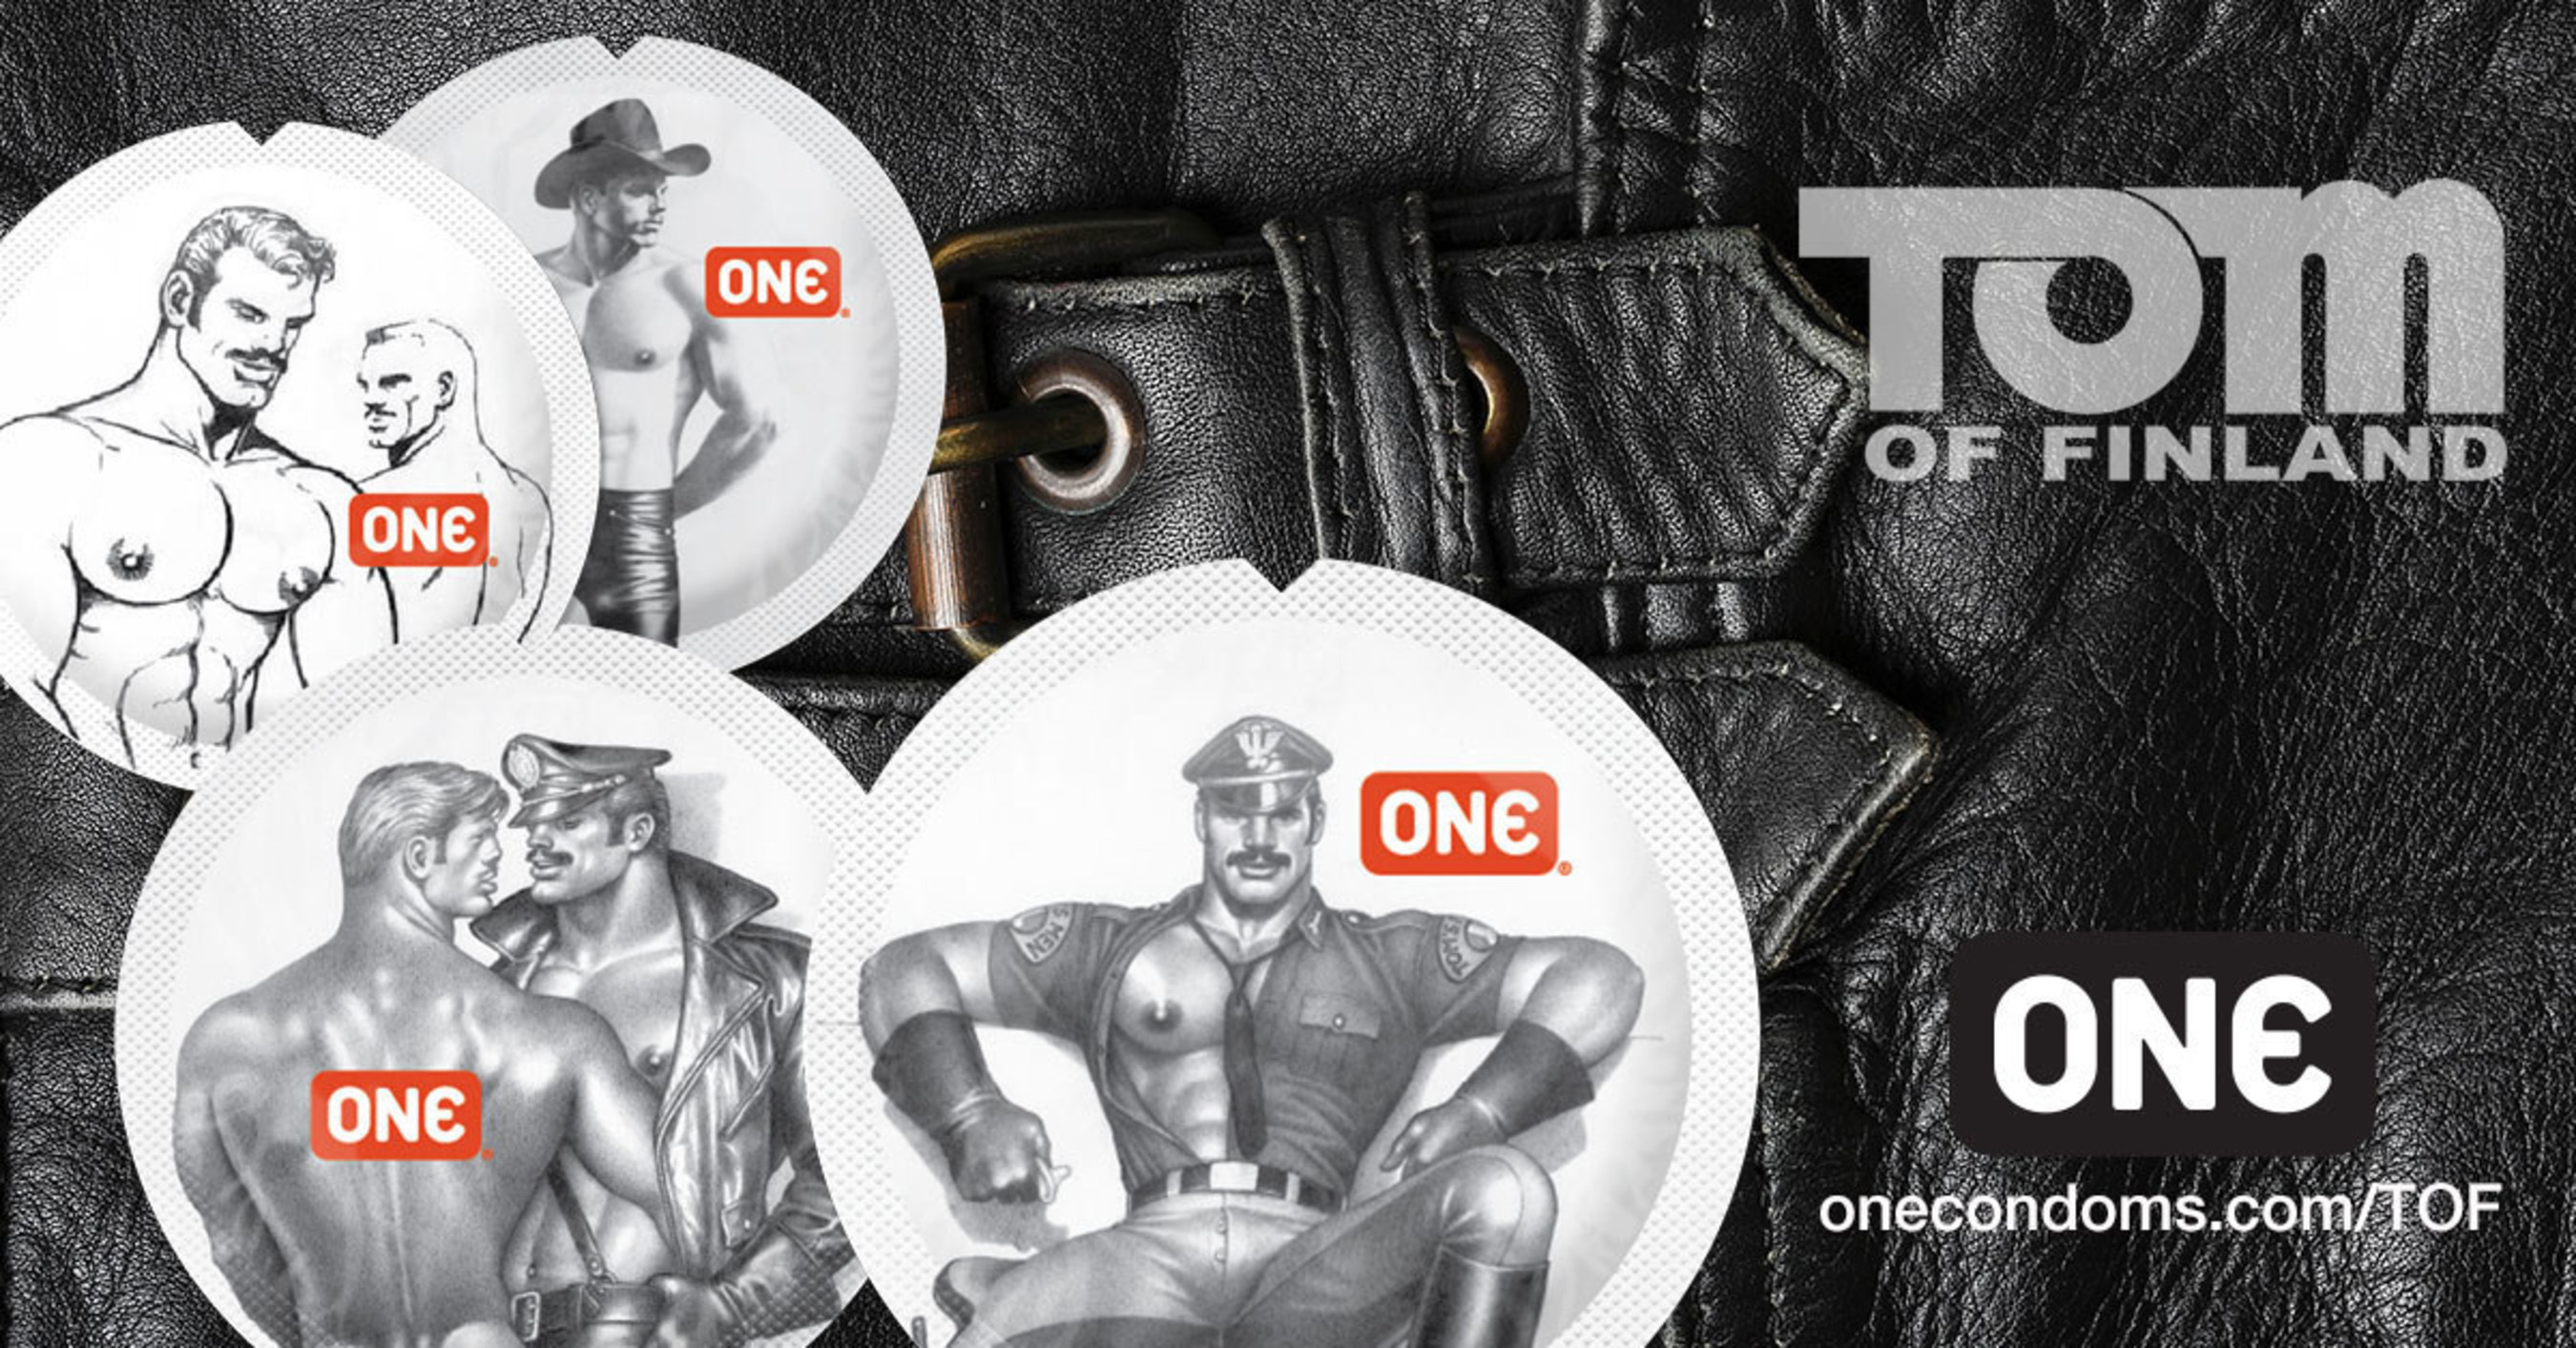 Tom of Finland Condoms from ONE(R).